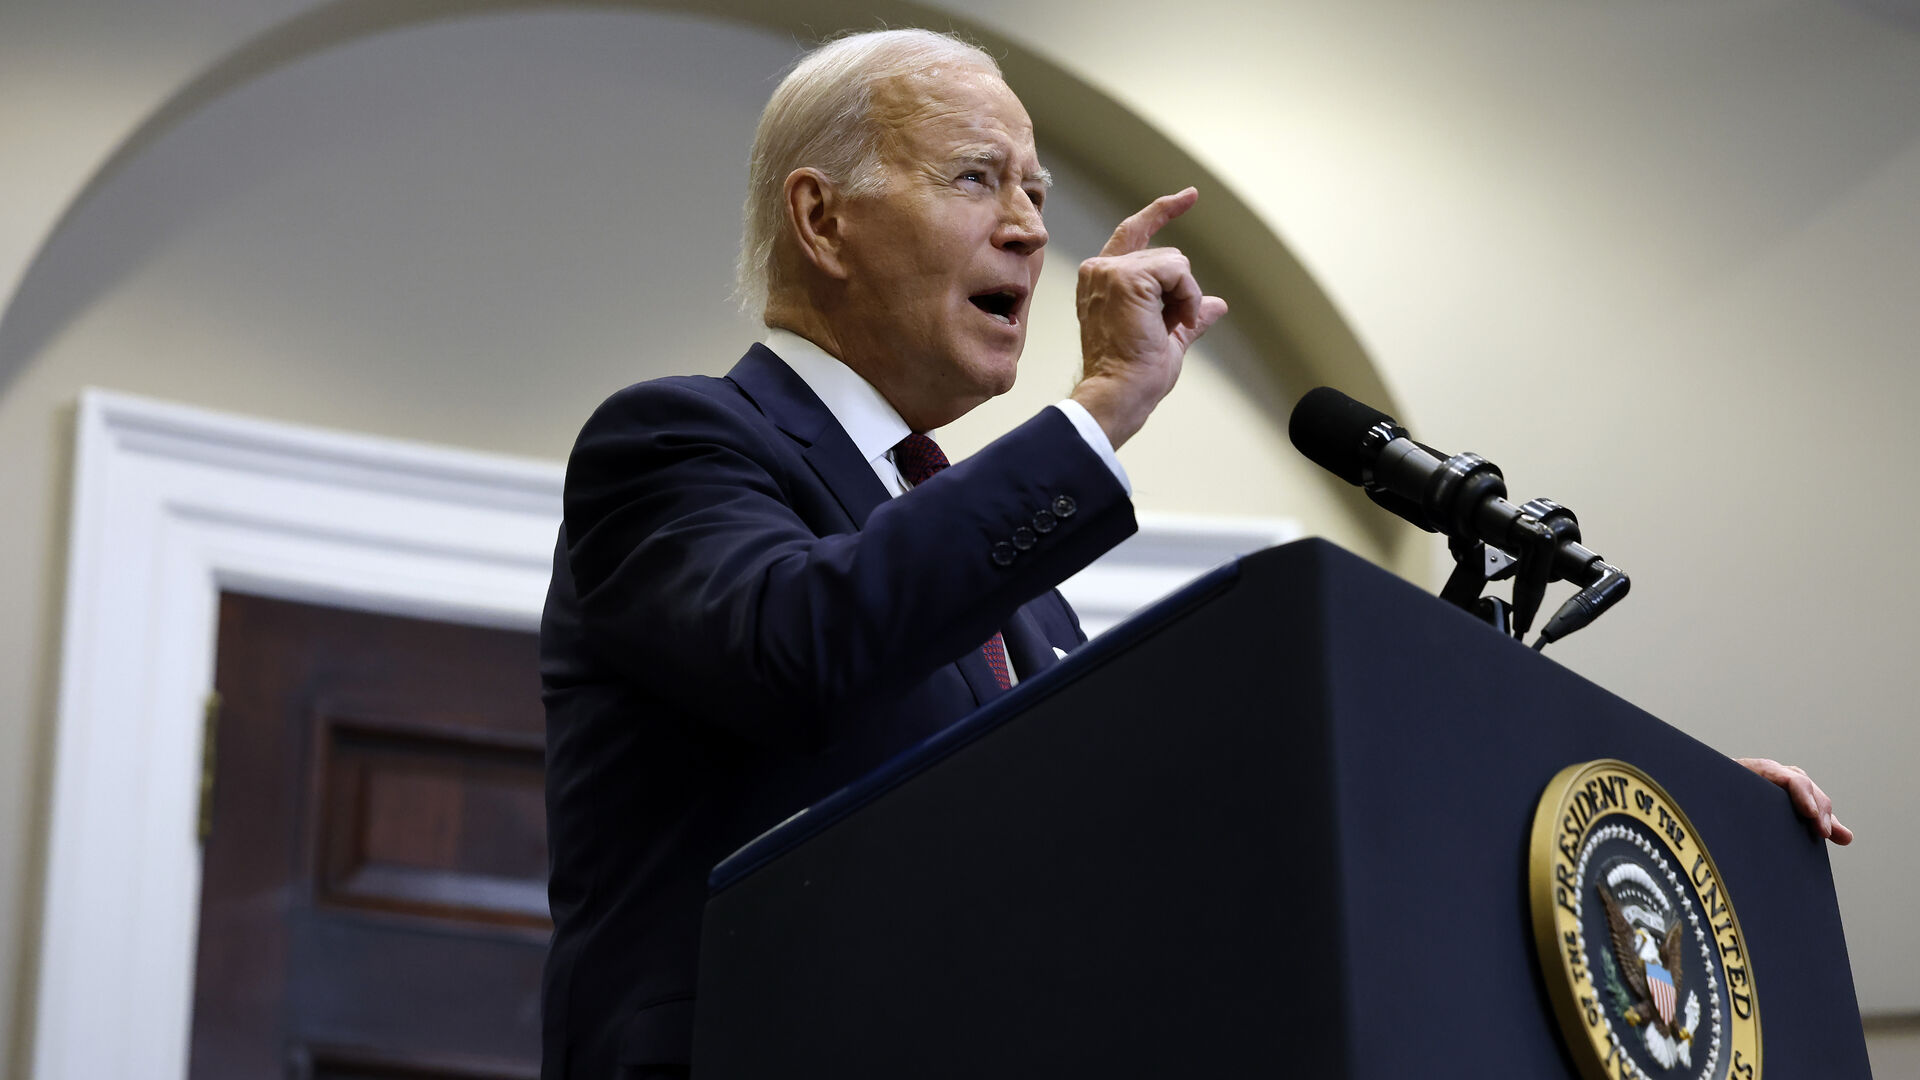 President Biden criticized the Supreme Court's decision that ends affirmative action and suggested an alternative for college admissions.